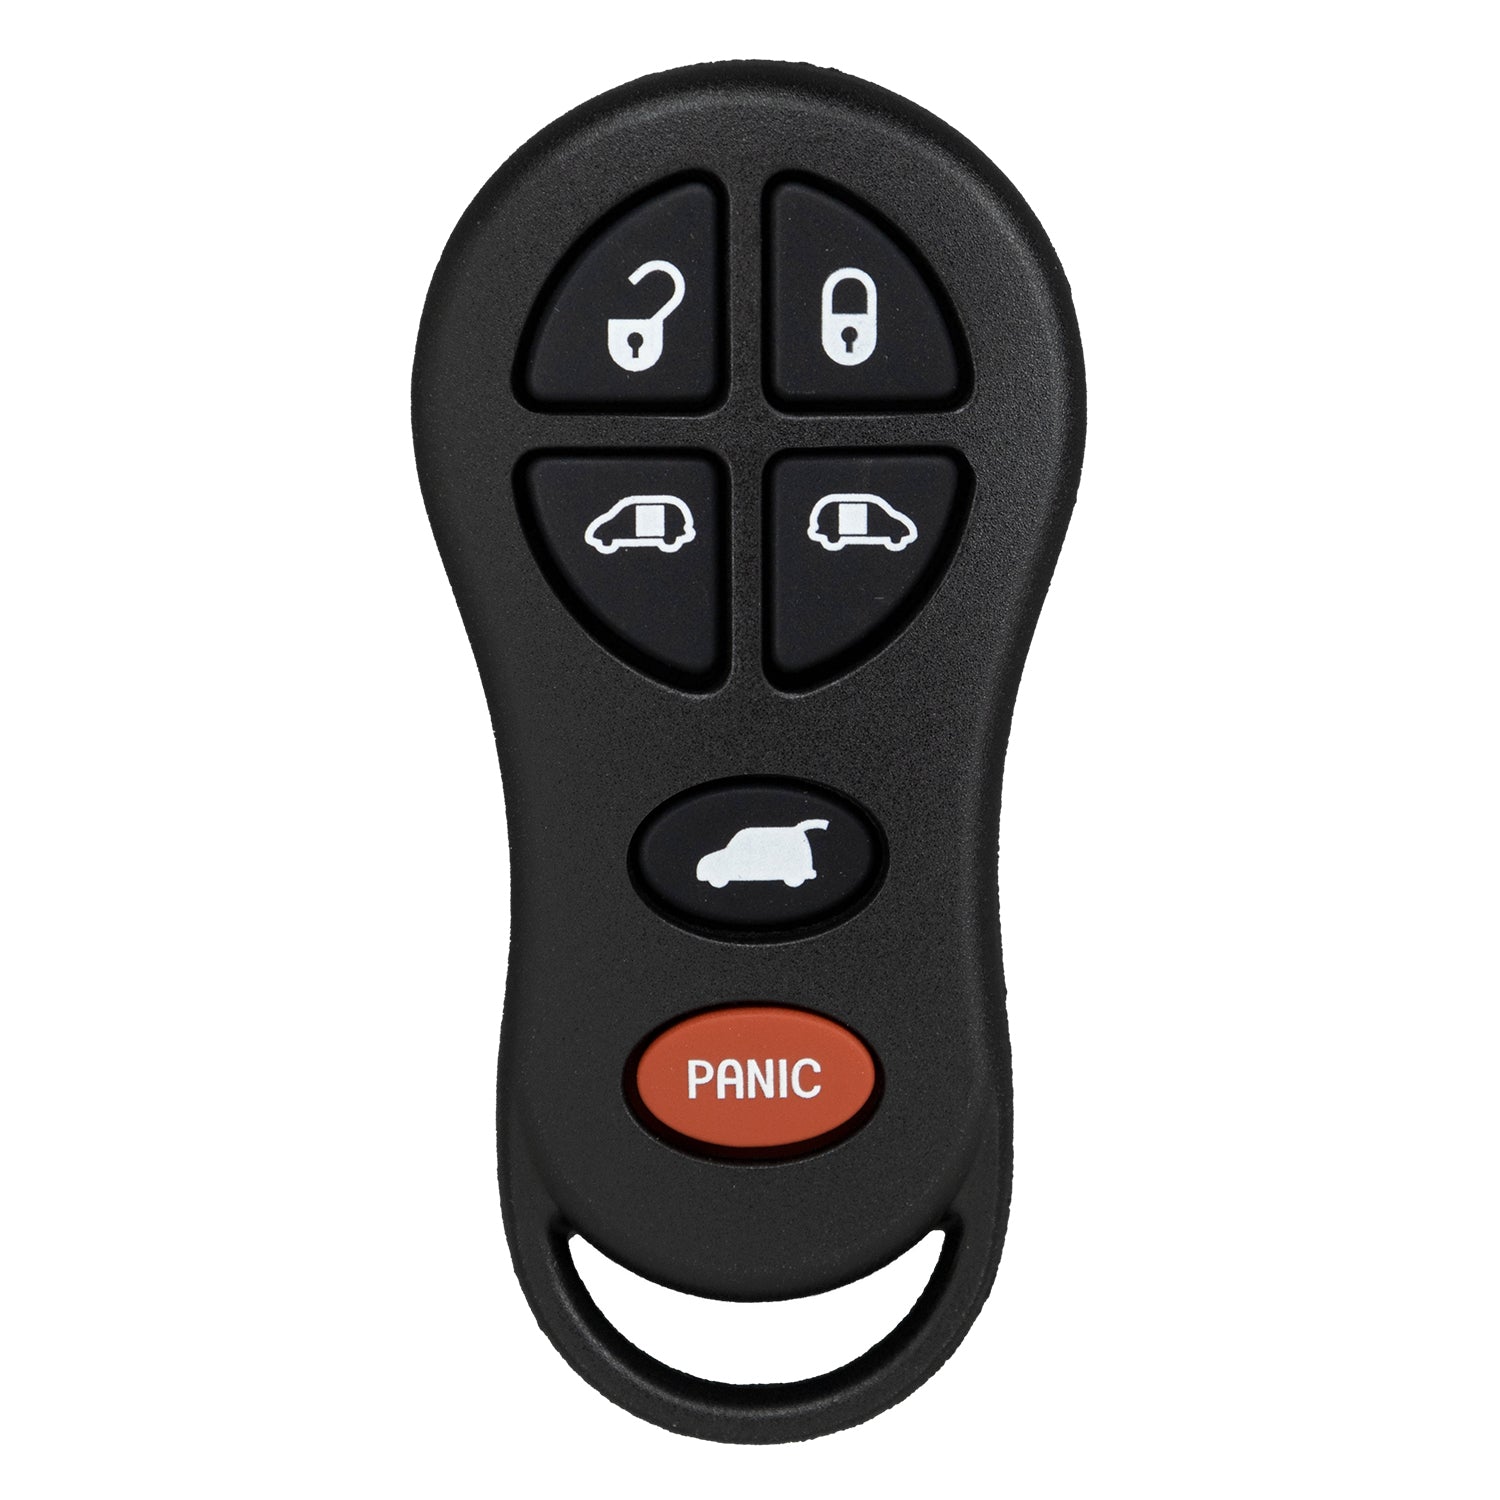 Car Keyless Entry Remote Key for Dodge Caravan Voyager Town & Country GQ43VT18T (6 Button)